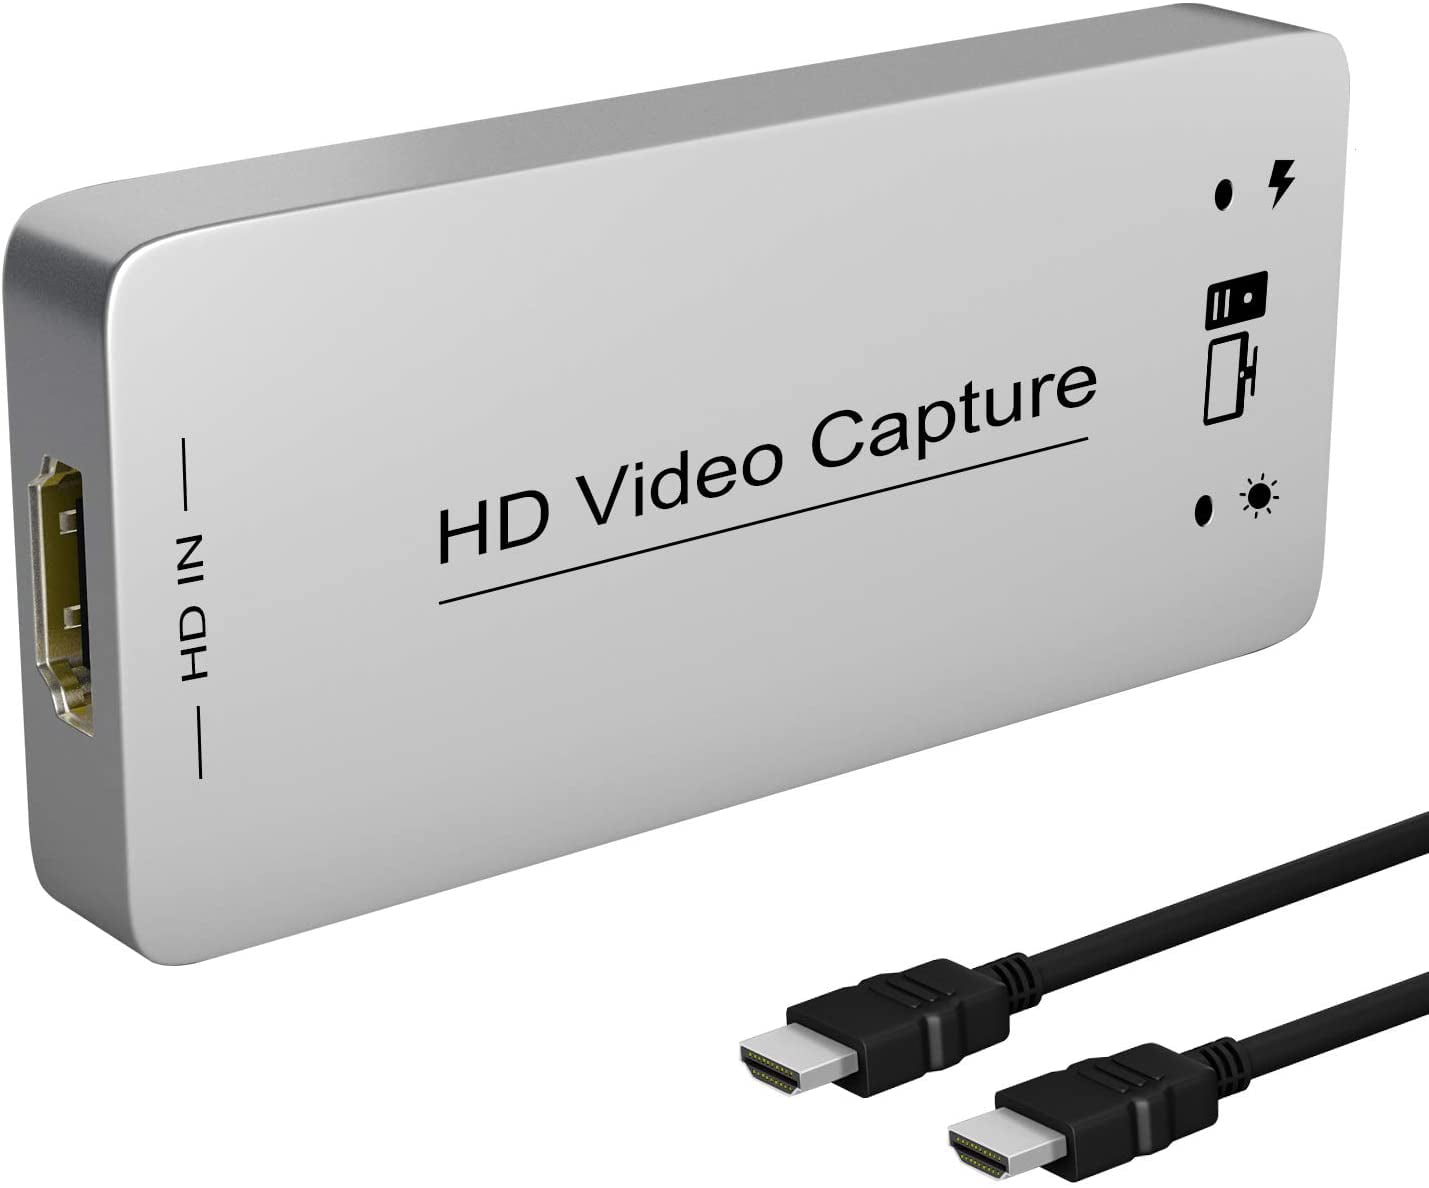 DIGITNOW Video Capture Card 4K HDMI Video Capture Device with Loop Out Support Windows、Android and MacOS Full HD 1080P Live Streaming Video Recorder Converter 